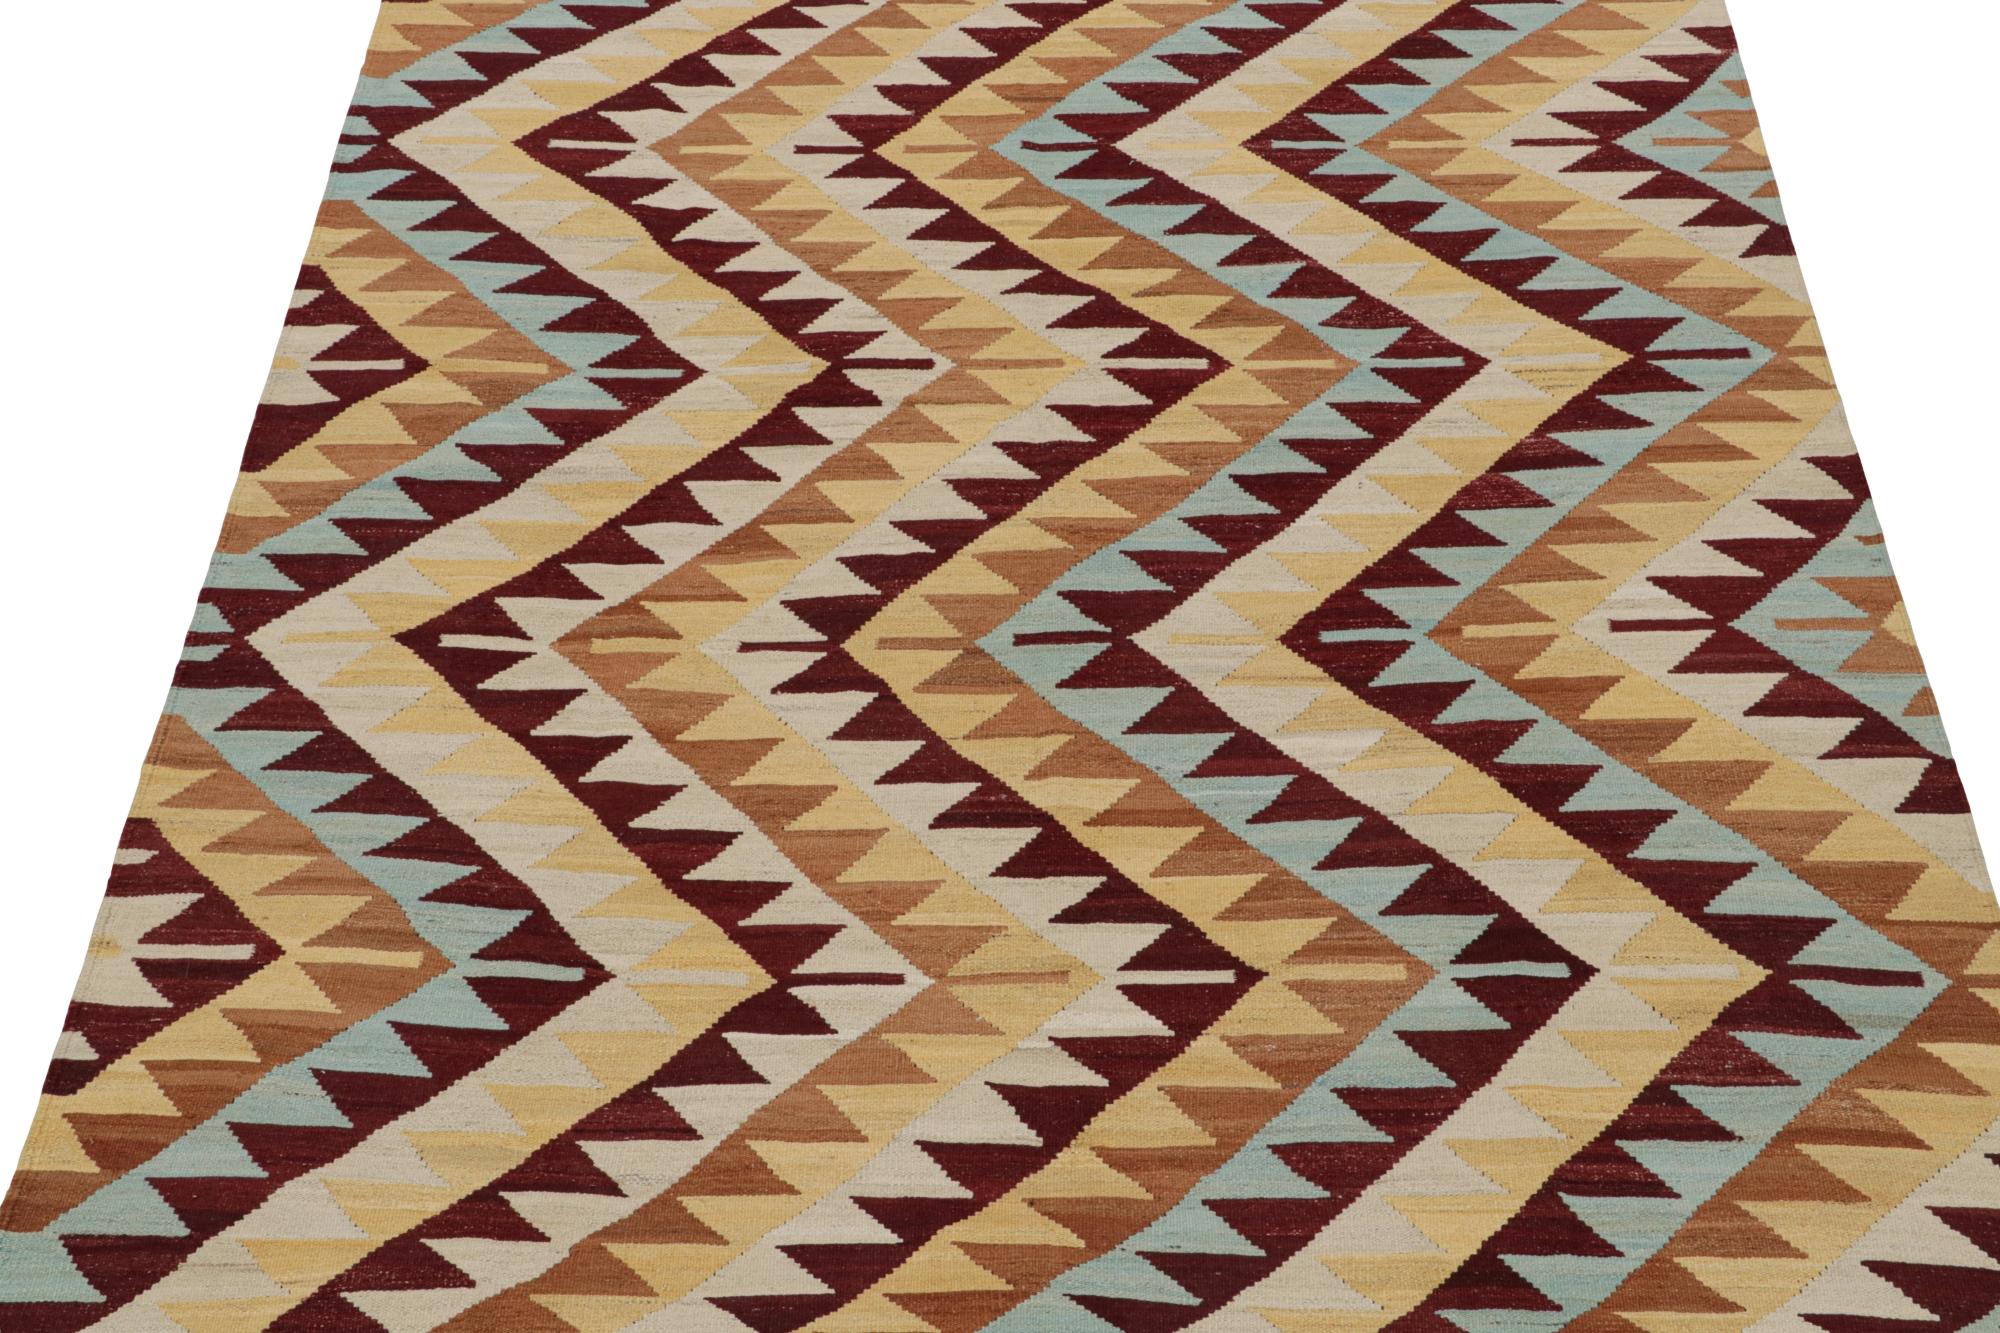 Rug & Kilim’s Tribal Style Kilim in Red, Blue and Beige-Brown Geometric Patterns In New Condition For Sale In Long Island City, NY